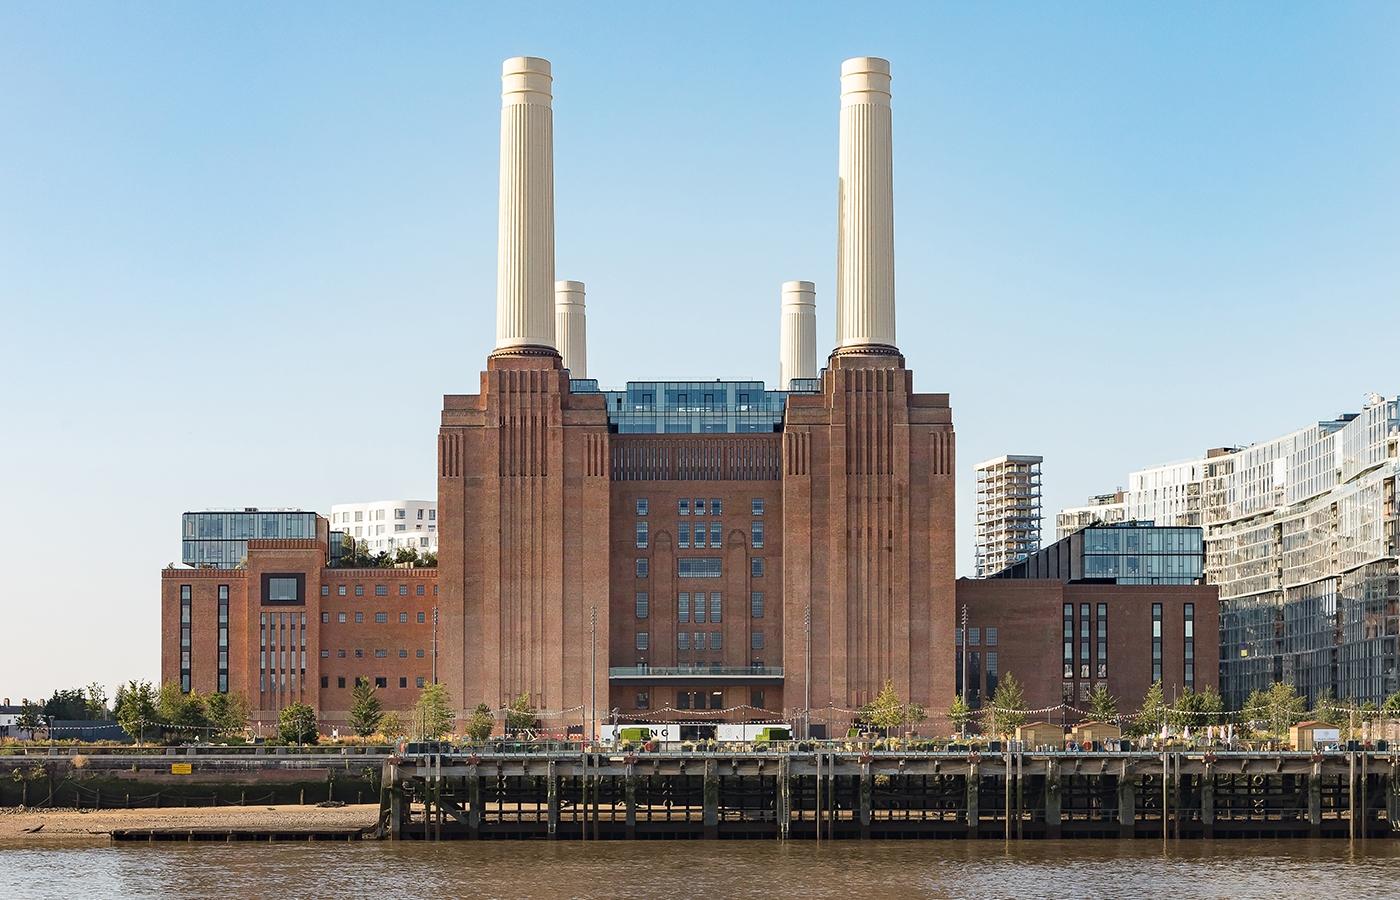 The former coal-fired power station has been transformed into an entirely new district / WilkinsonEyre